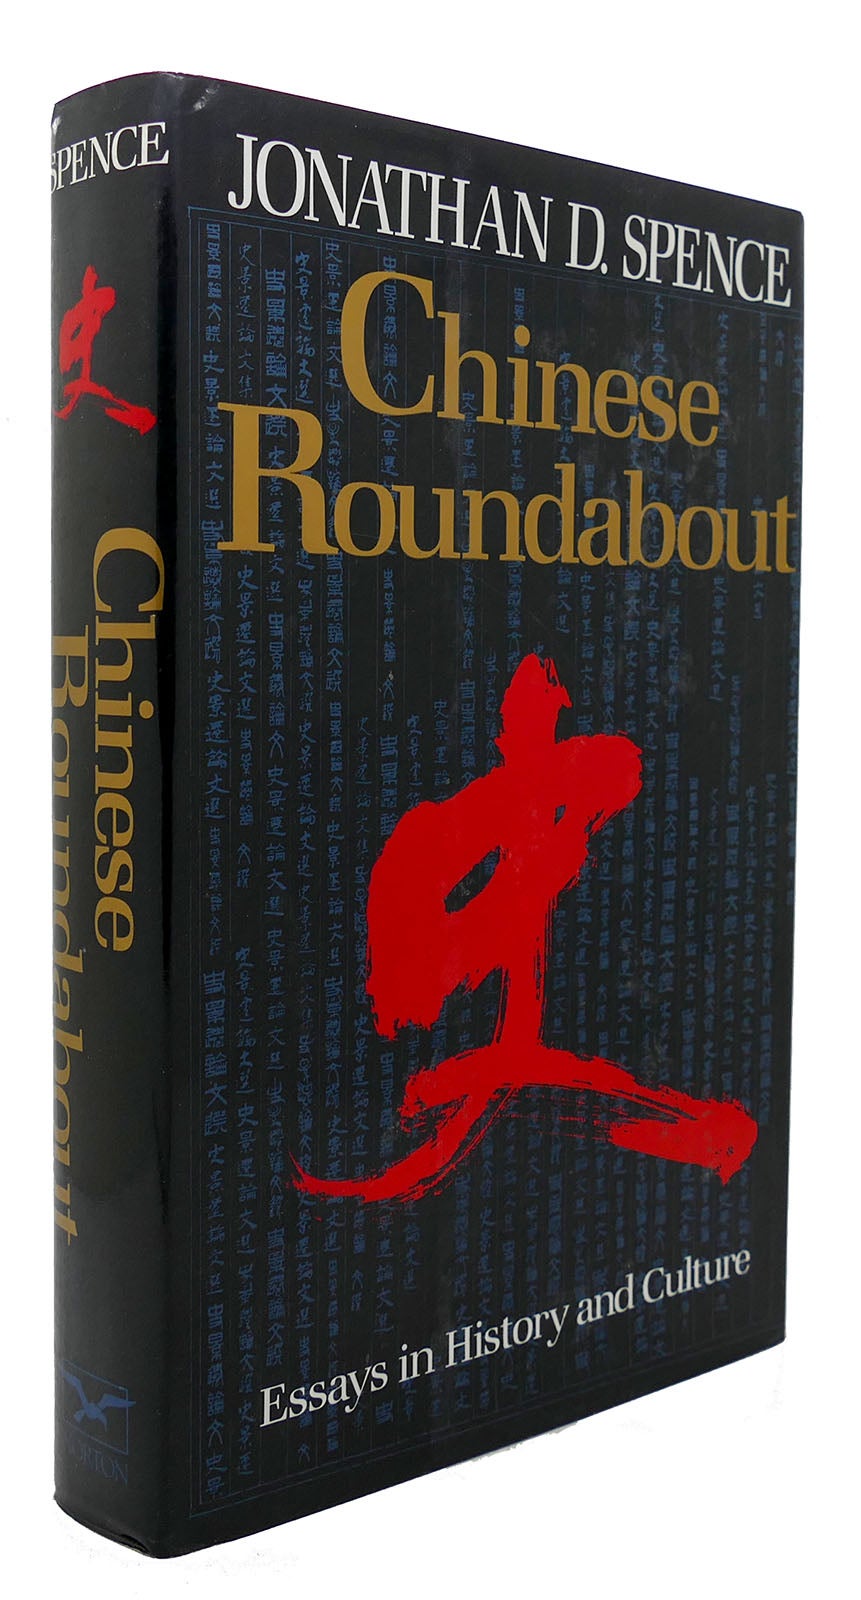 chinese roundabout essays on history and culture